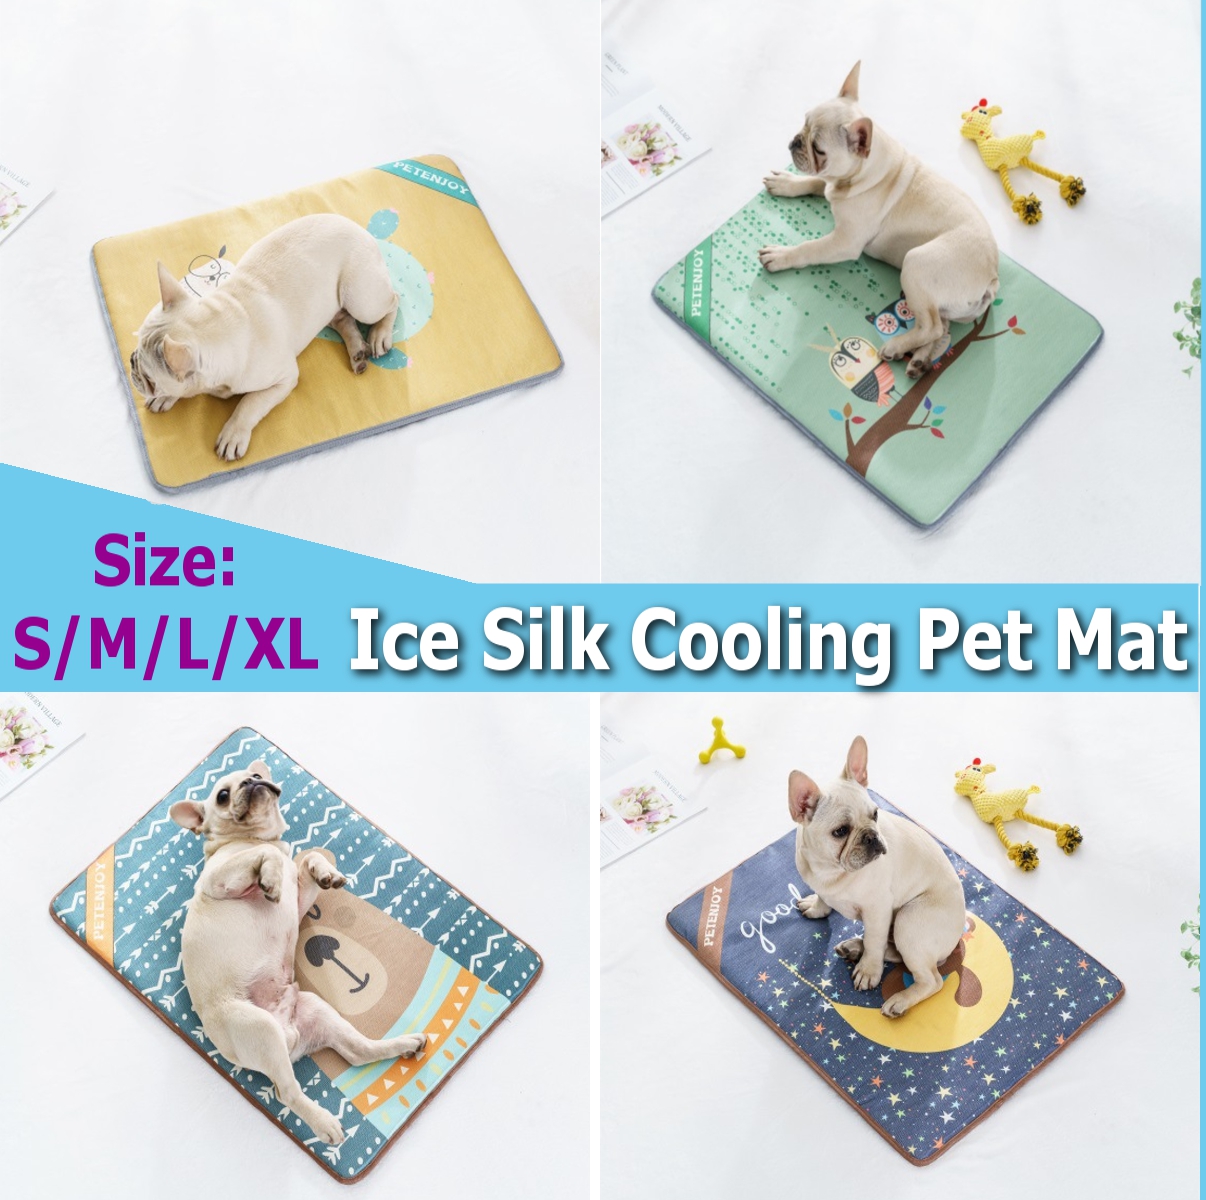 SMLXL-Ice-Silk-Summer-Cooling-Pet-Dog-Cat-Puppy-Cushion-Mat-Pad-Home-1550150-1